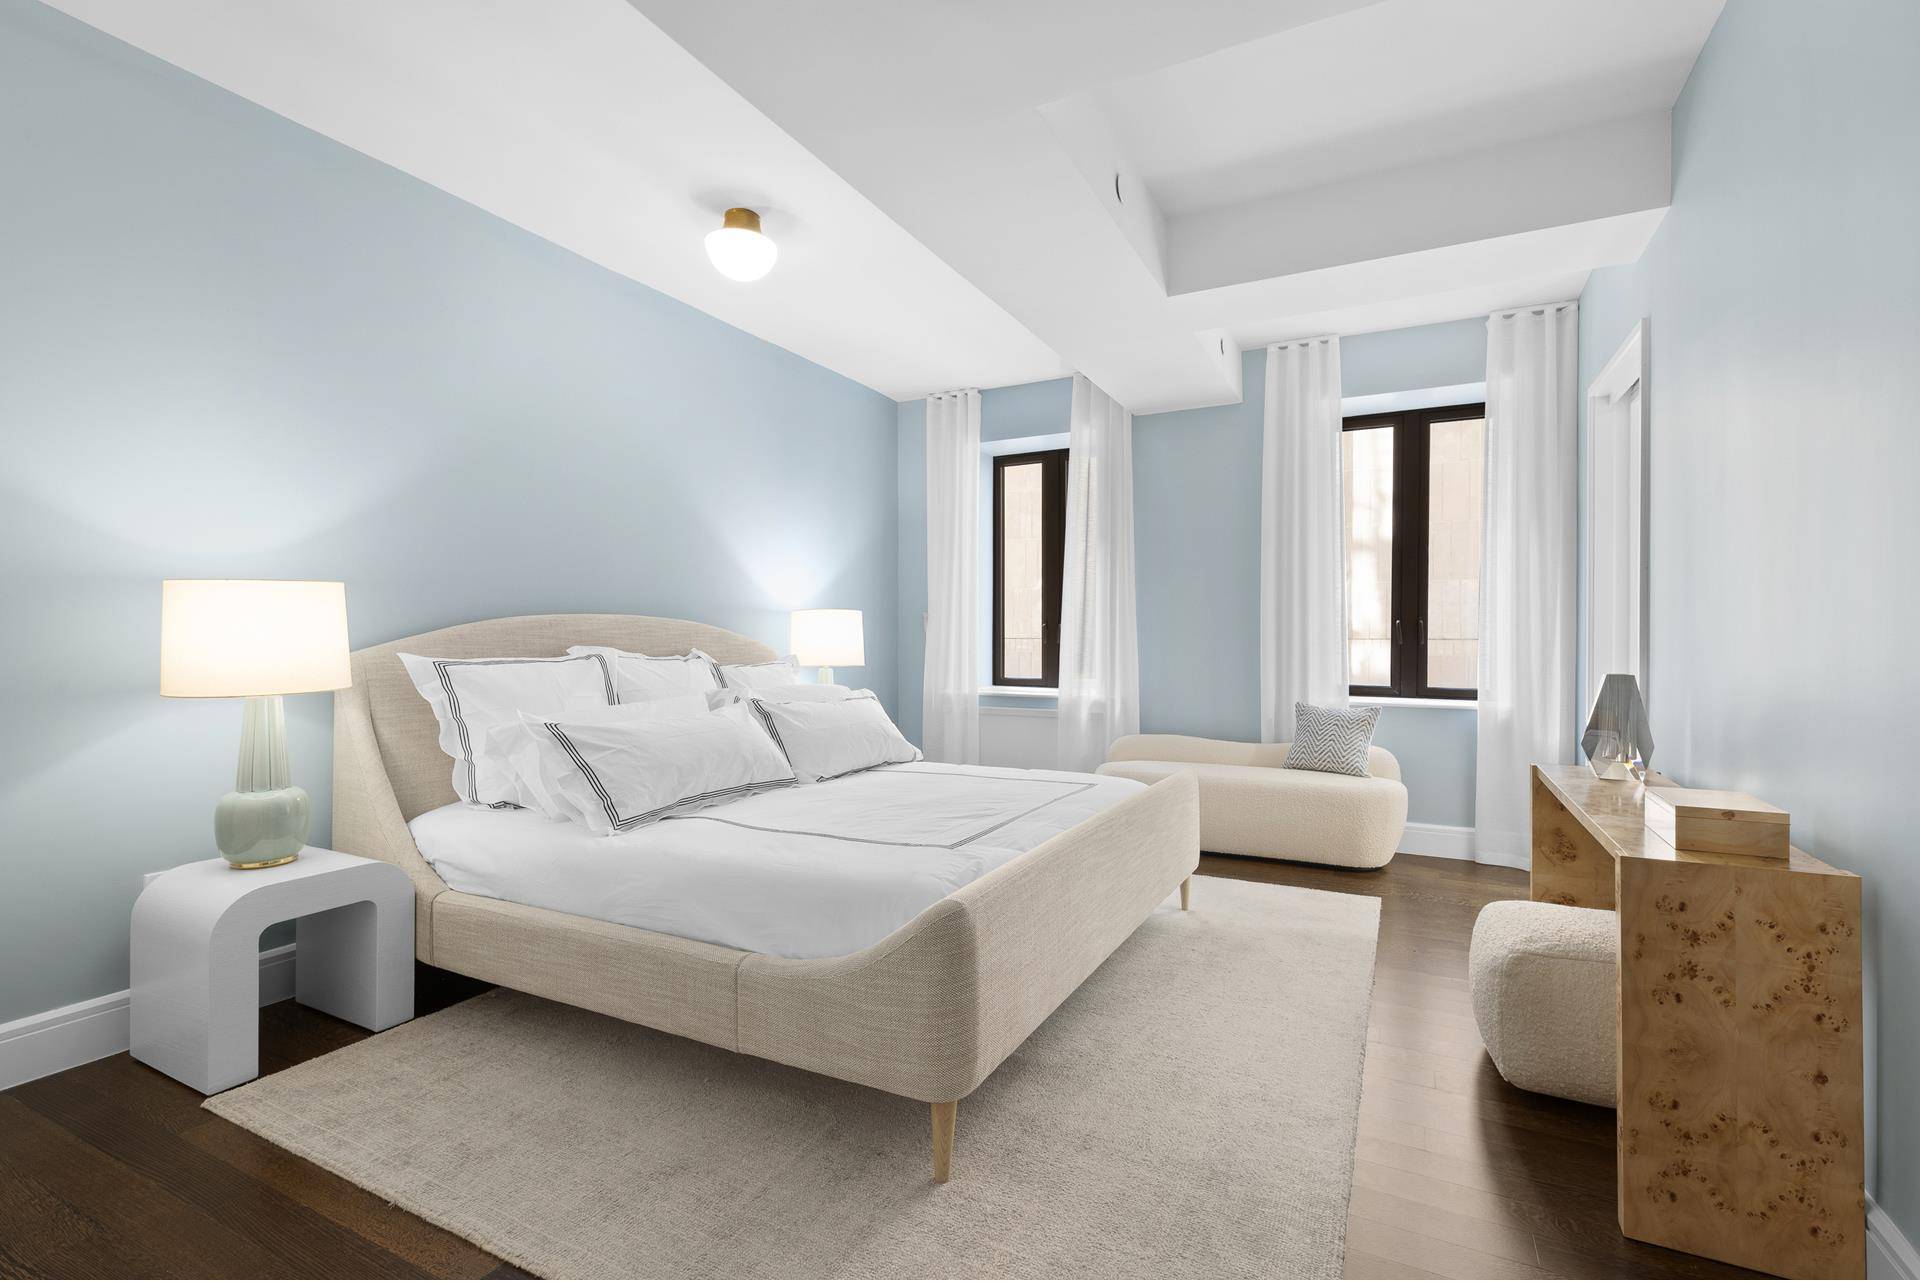 Comprising just eight full floor residences, 220 East 20th Street offers exceptionally discreet living within Gramercy Square.